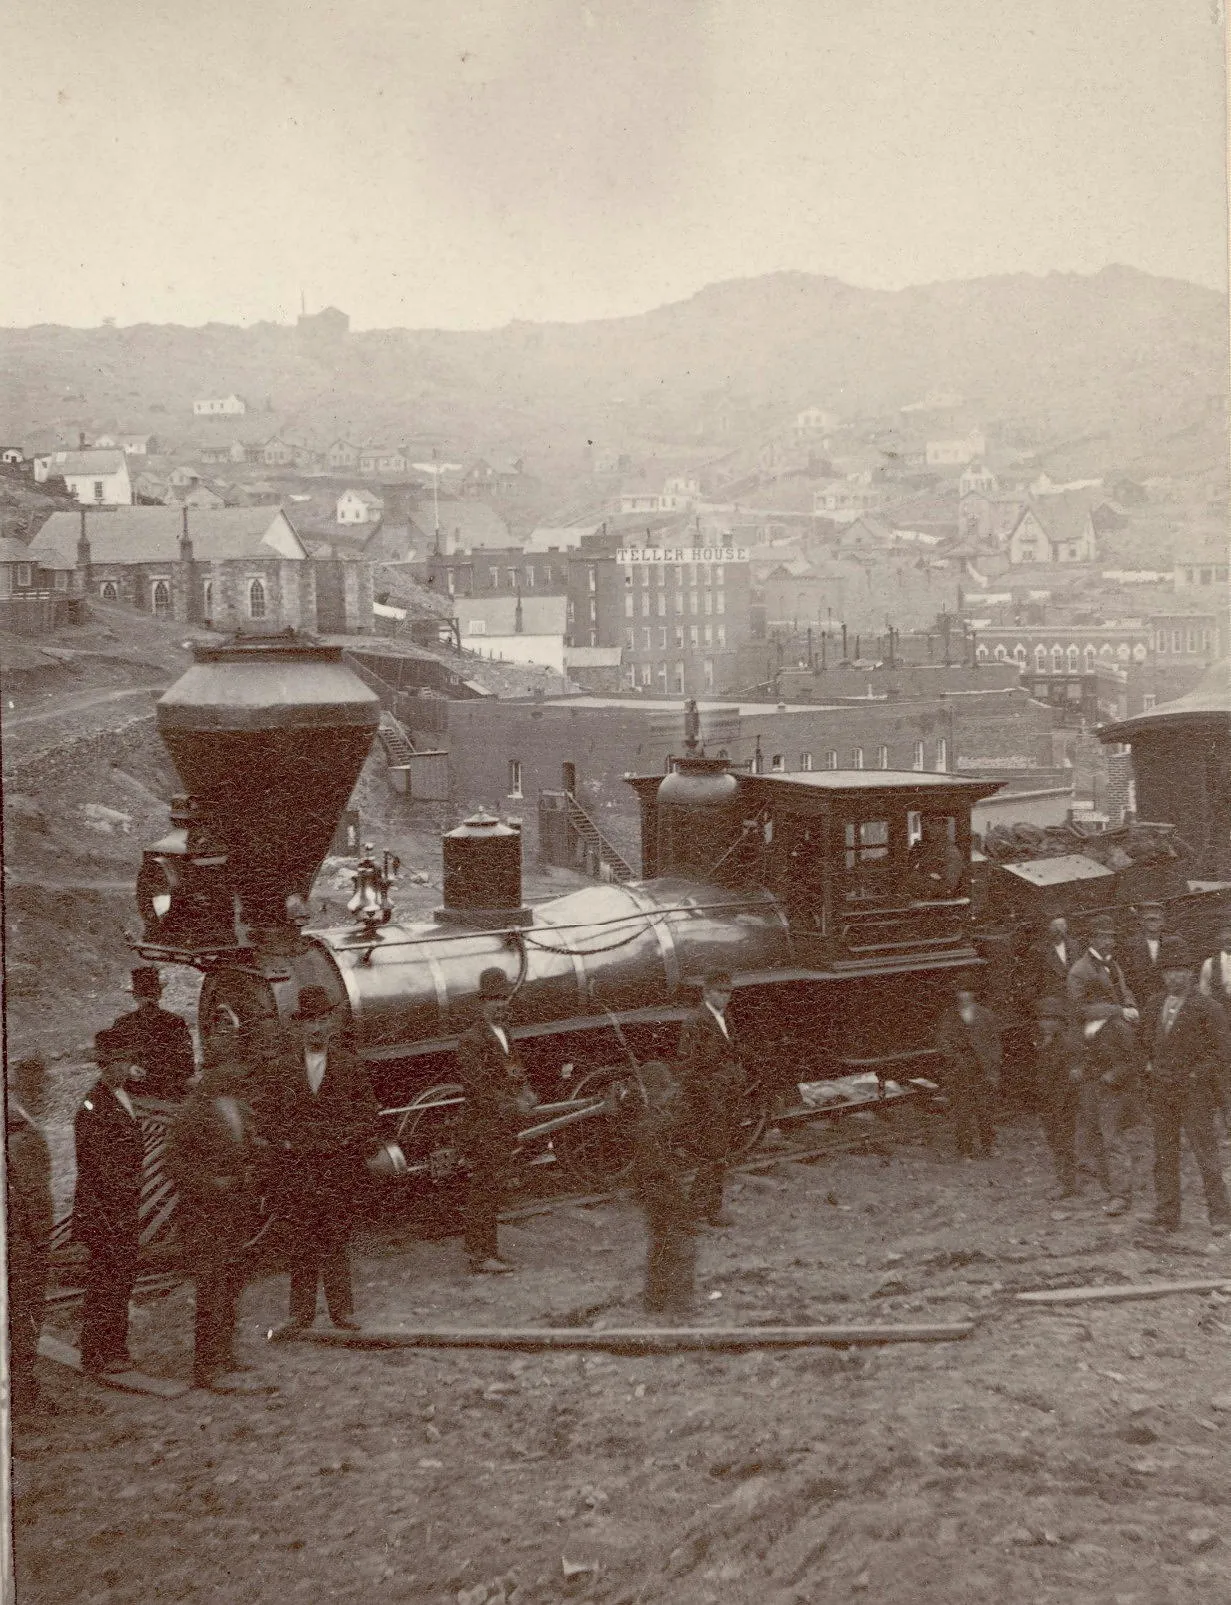 Men in suits and hats standing in front of a steam locomotive.  Mountainous Central City behind, including the Teller House.